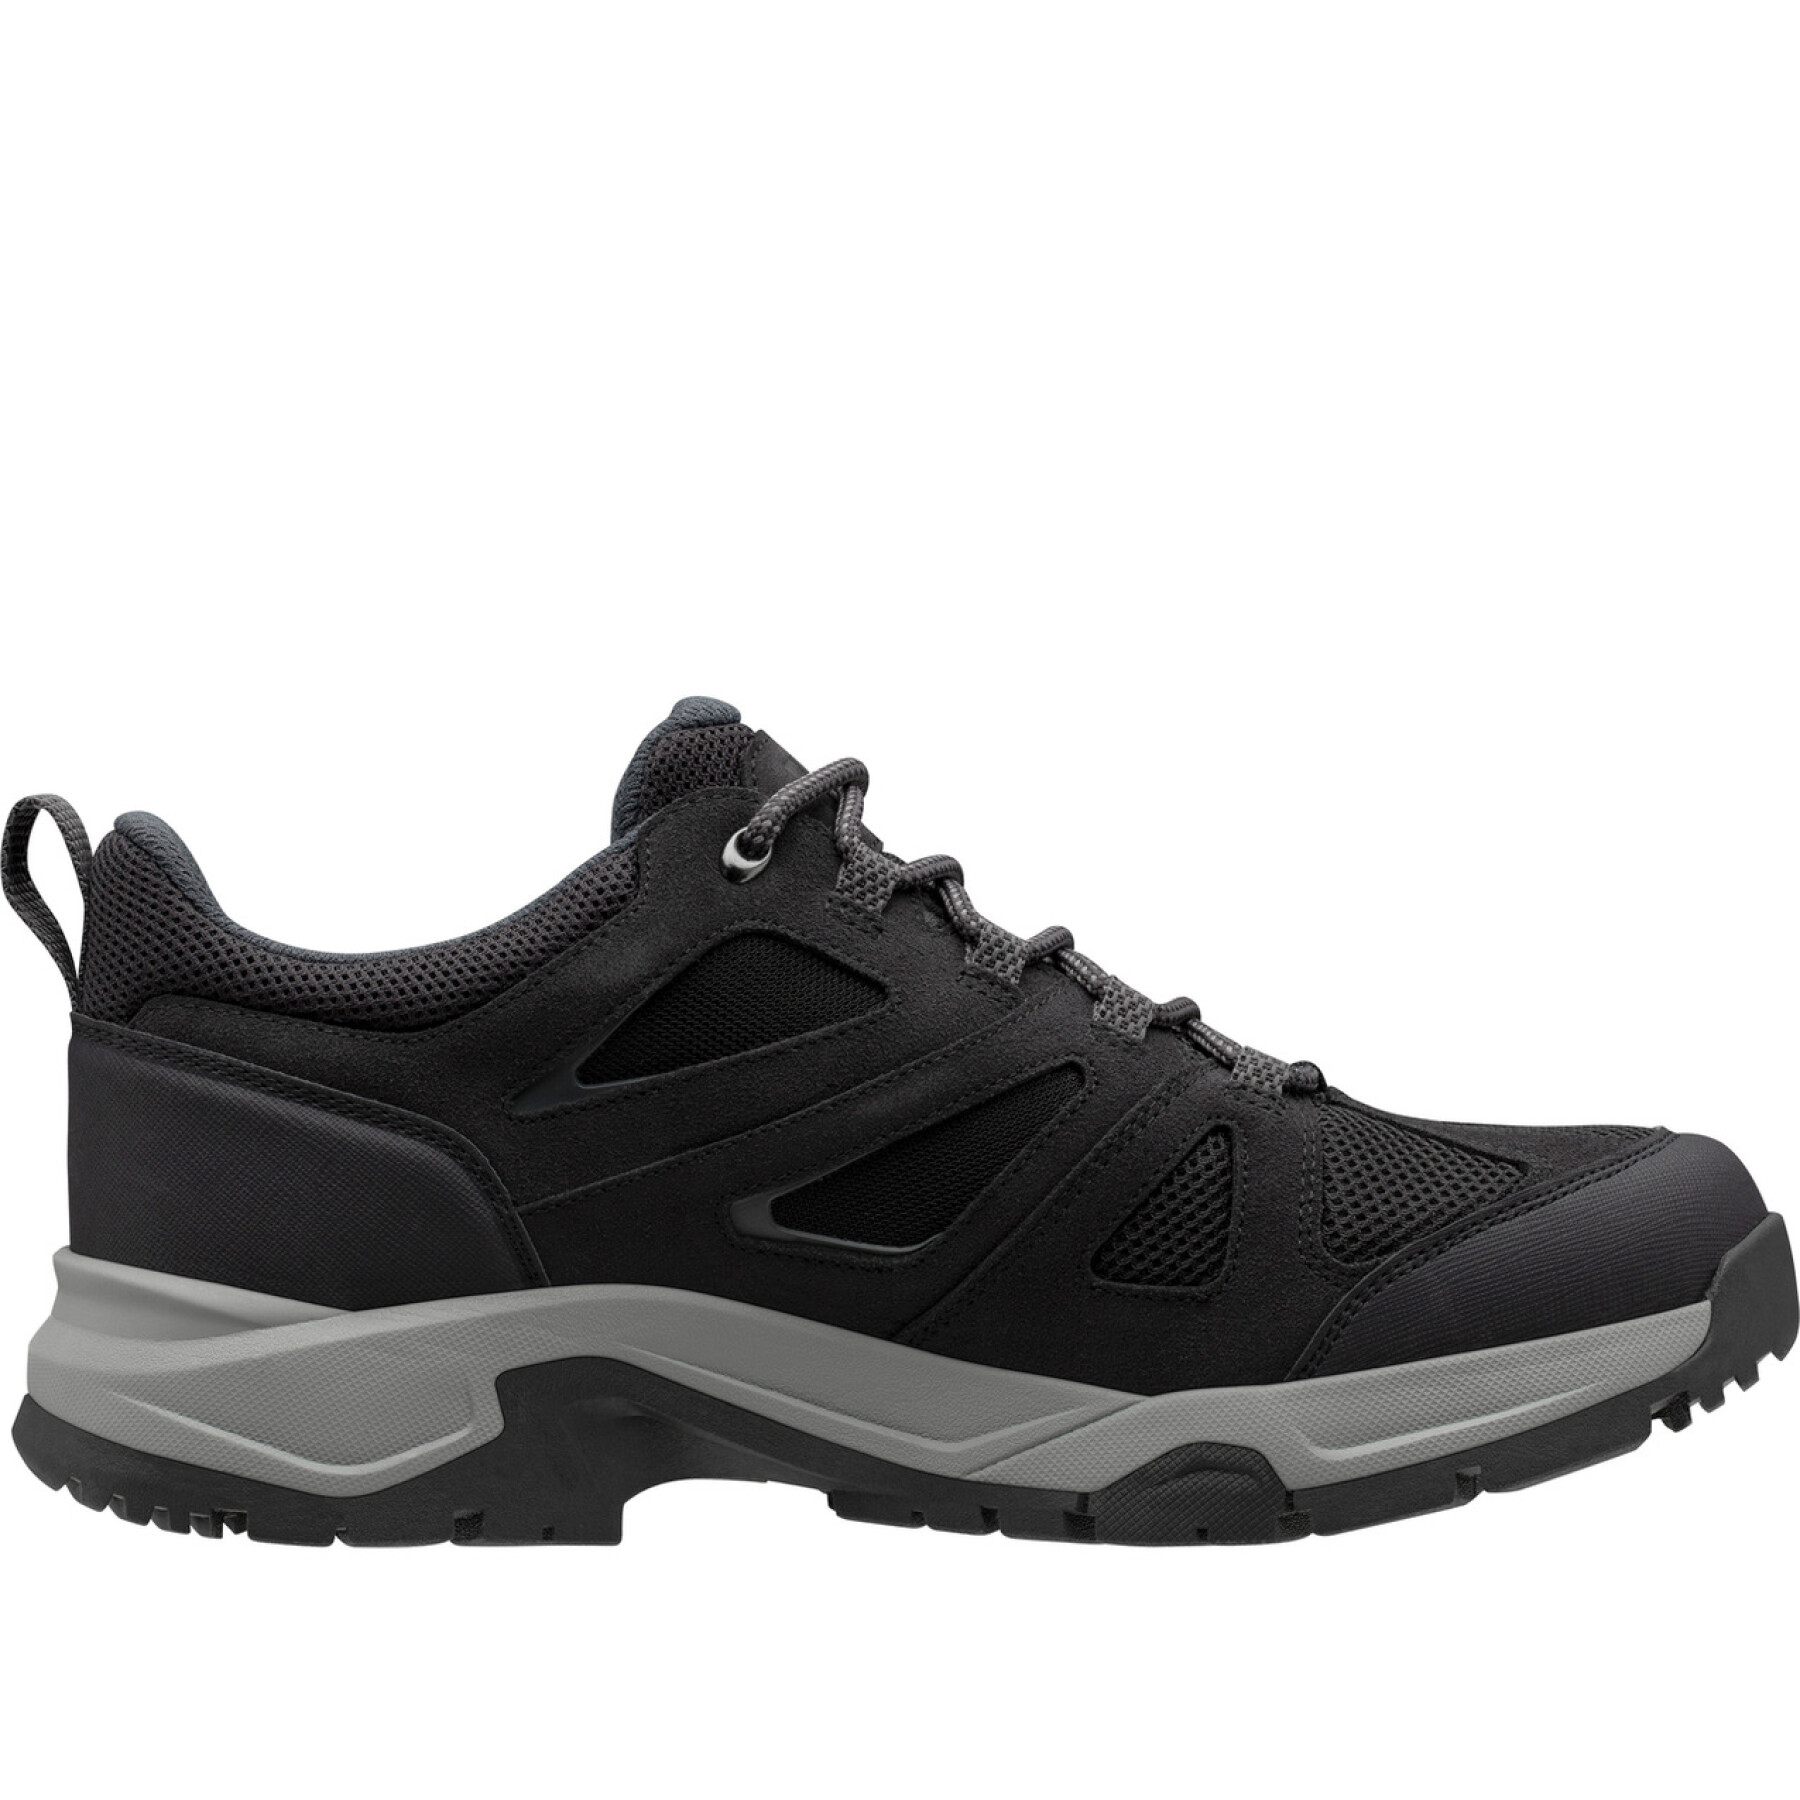 Hiking shoes Helly Hansen Switchback Low HT